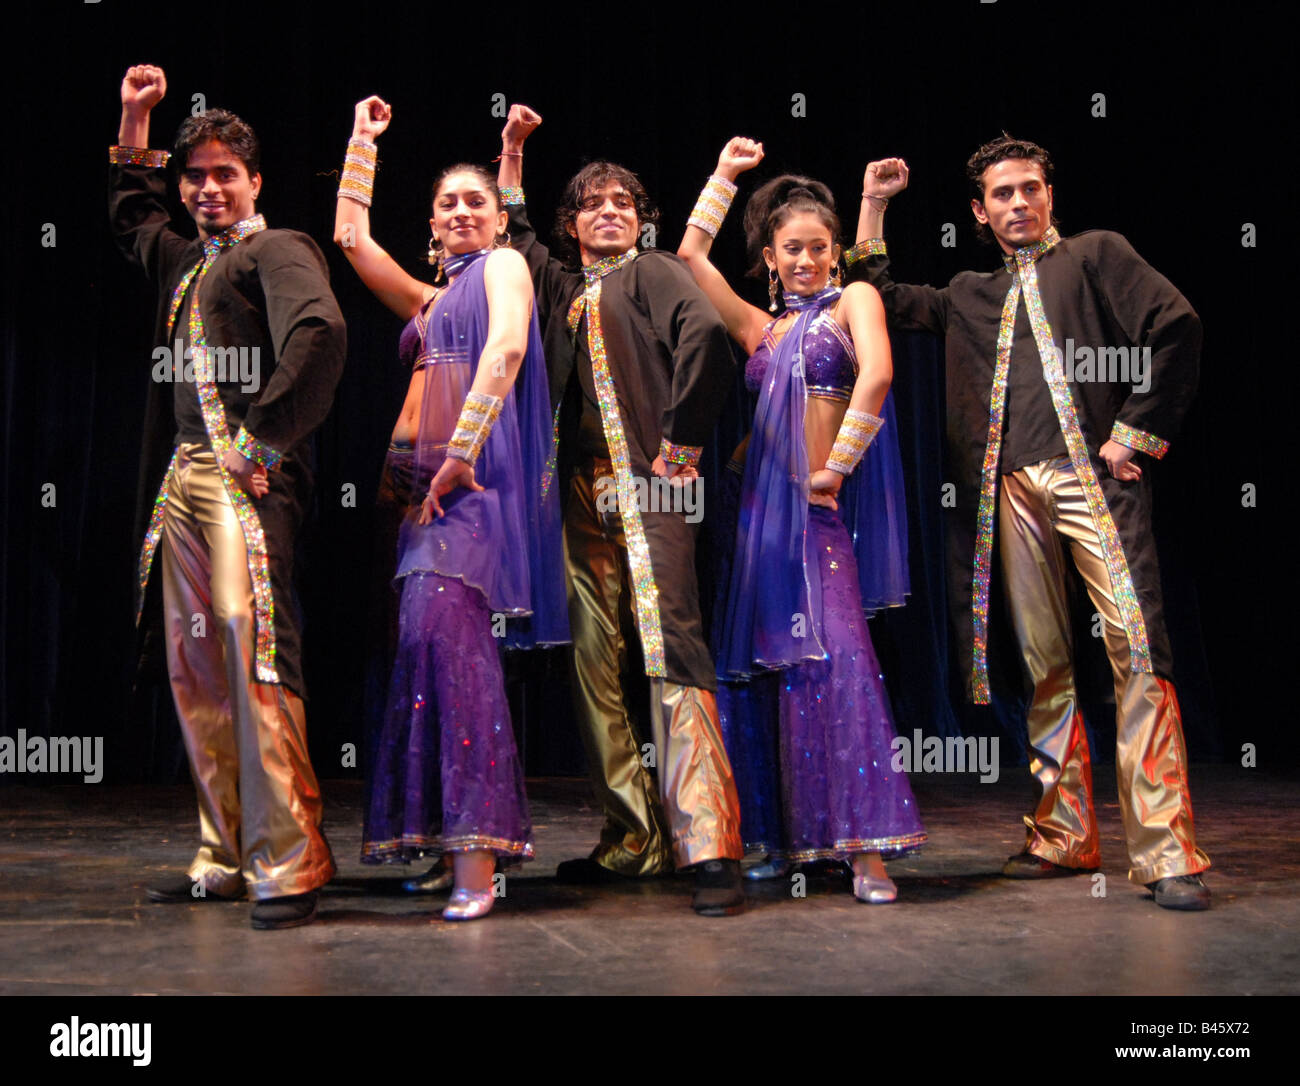 Theater / theatre, 'Bollywood - The Show', director: Toby Gough, scene dance 'Shava, Shava', dancers: Nitin Poojary, Amit Pawar, Afzal Mapari, , Additional-Rights-Clearance-Info-Not-Available Stock Photo